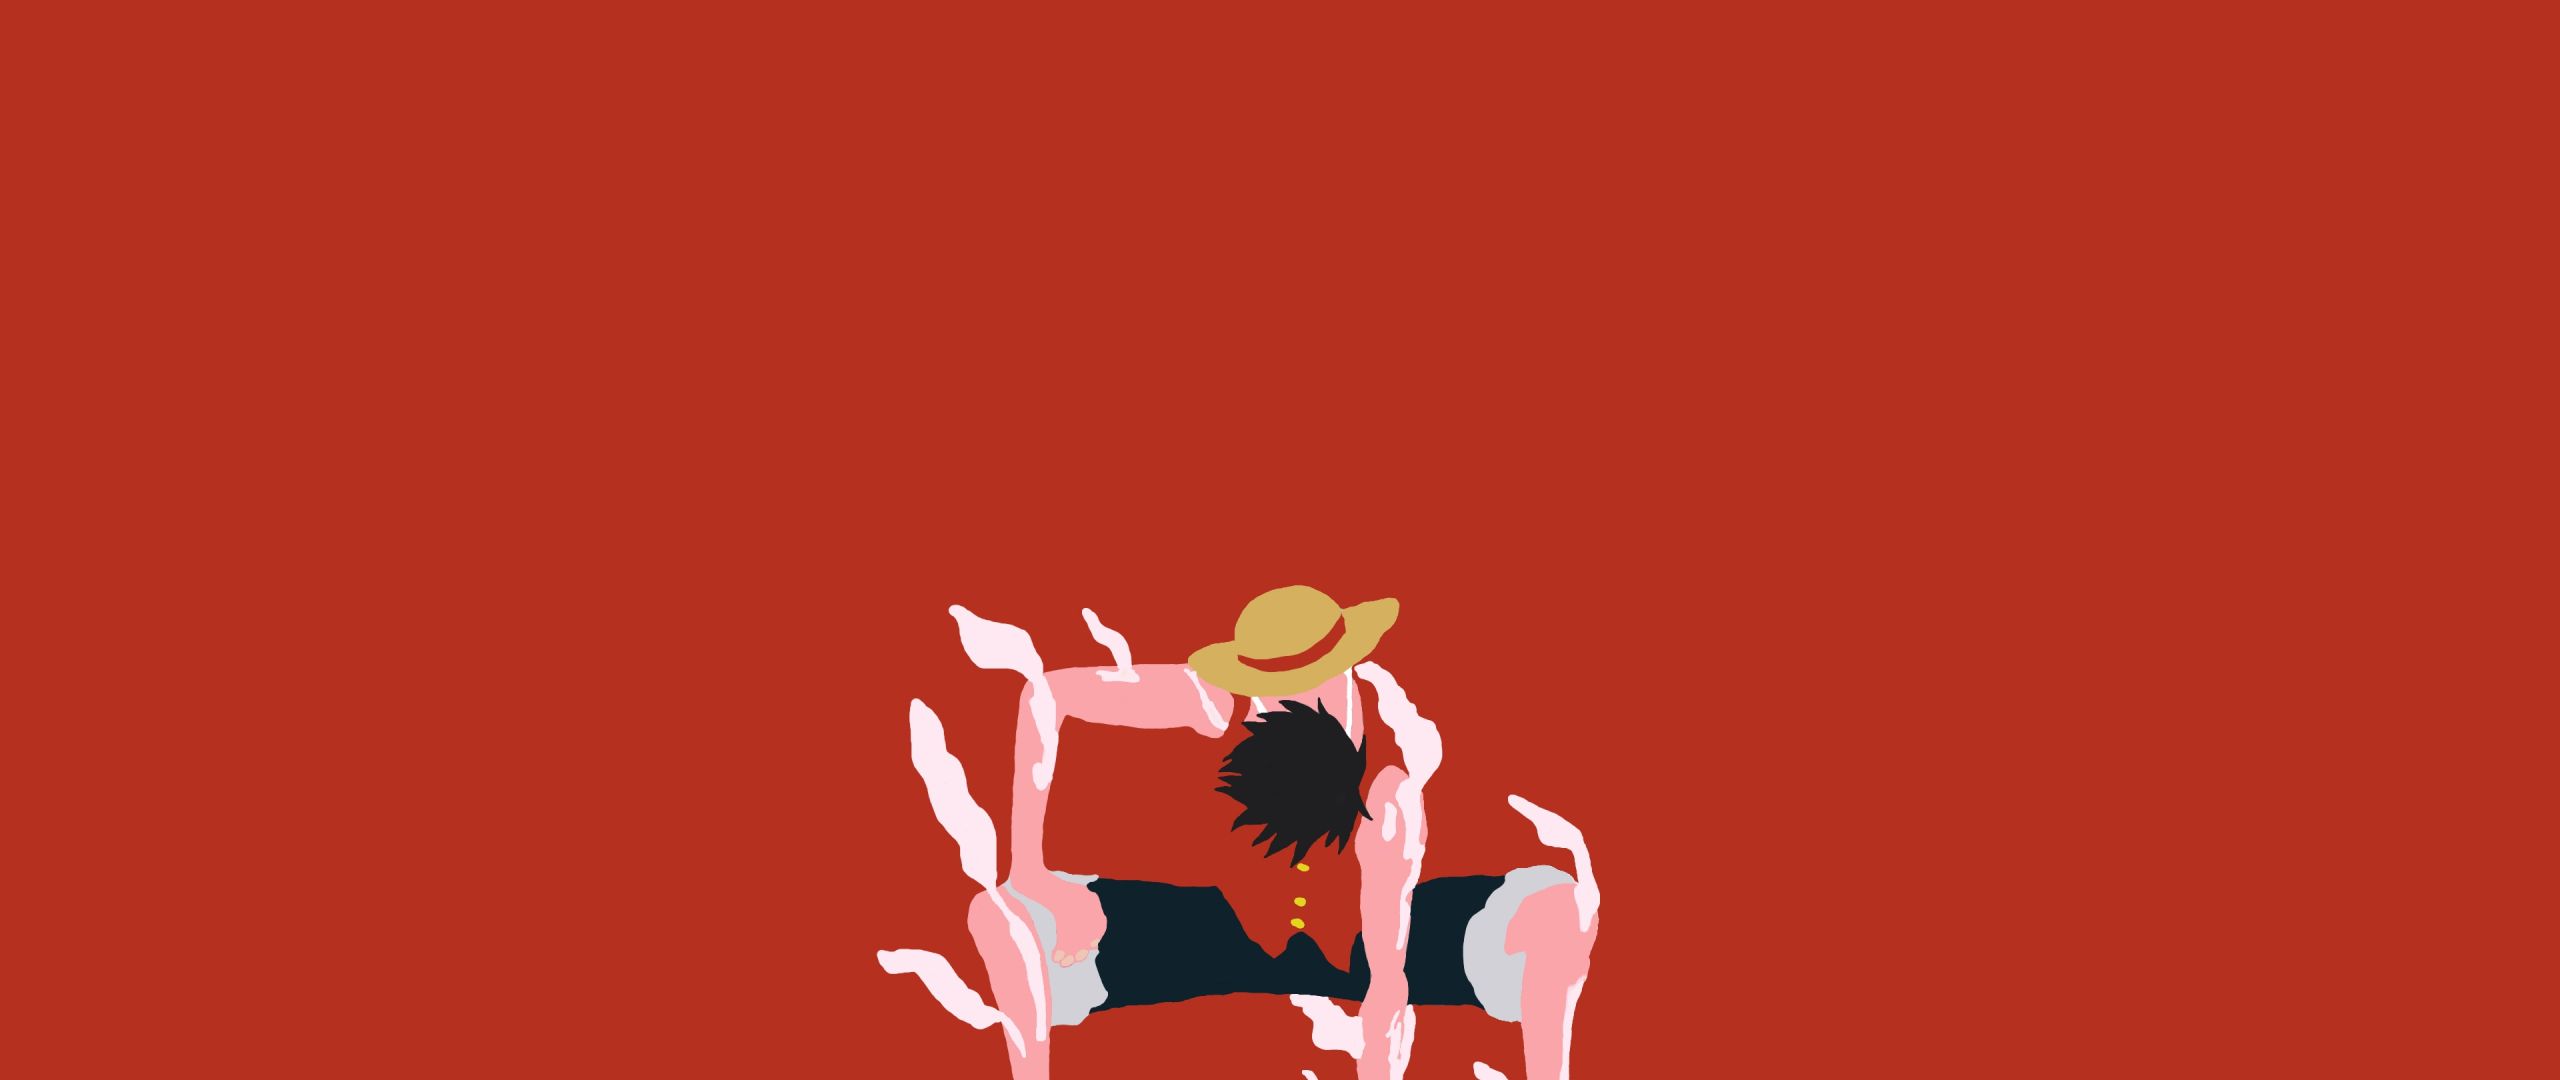 Download 2560x1080 wallpaper monkey d. luffy, one piece, anime, minimal, anime boy, dual wide, widescreen, 2560x1080 HD image, background, 846